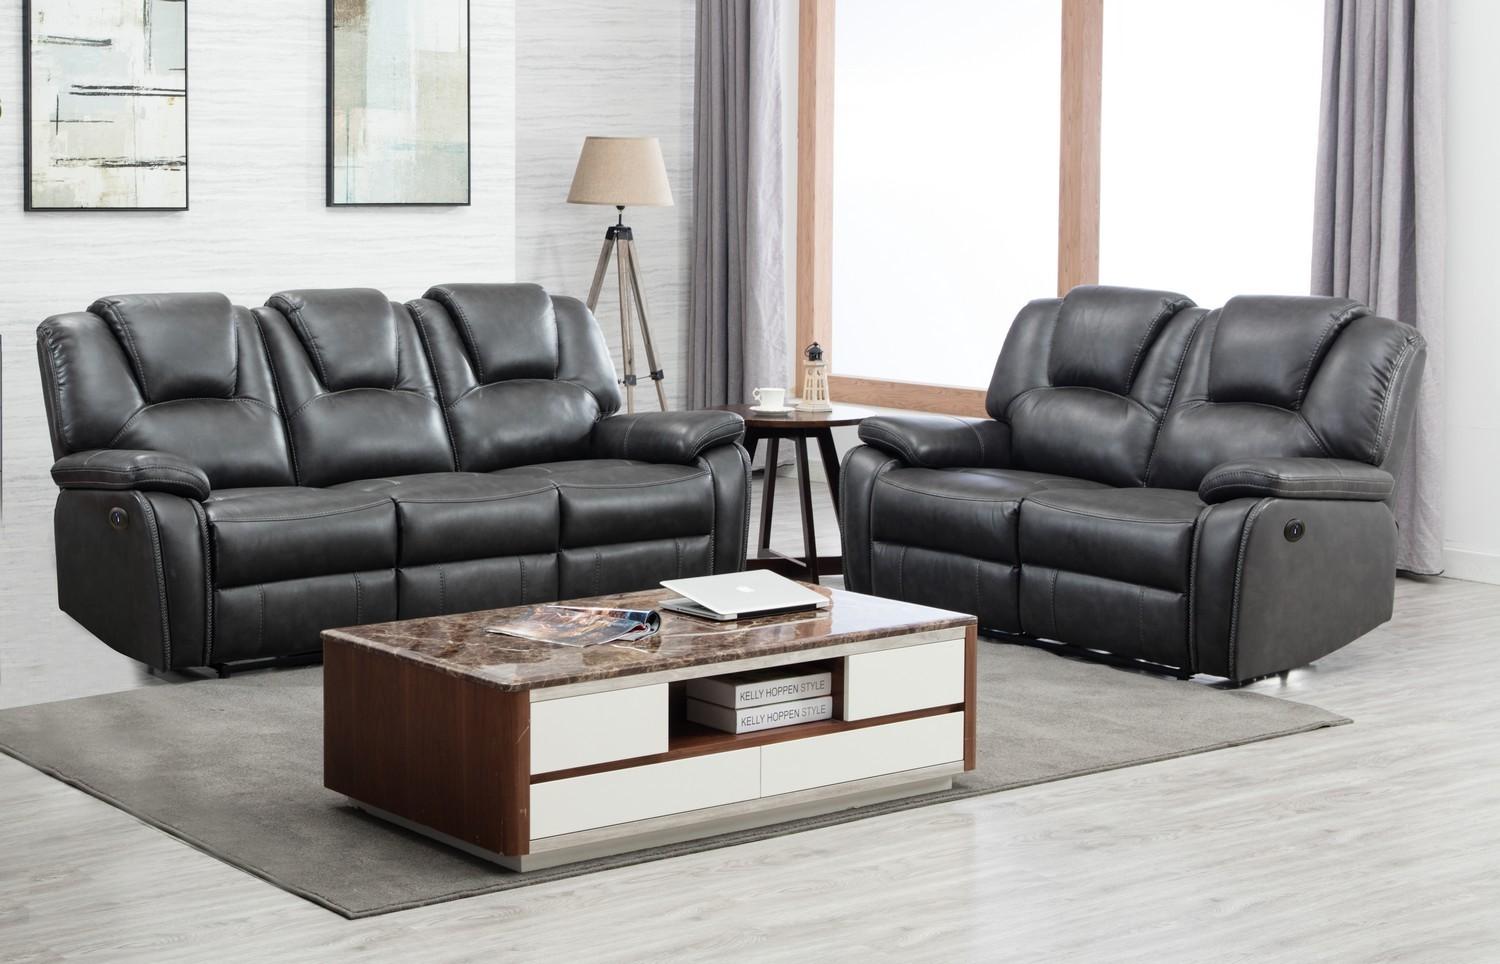 Contemporary Reclining Set 7993-GRAY 7993-GRAY-2PC in Gray Leather Air Material